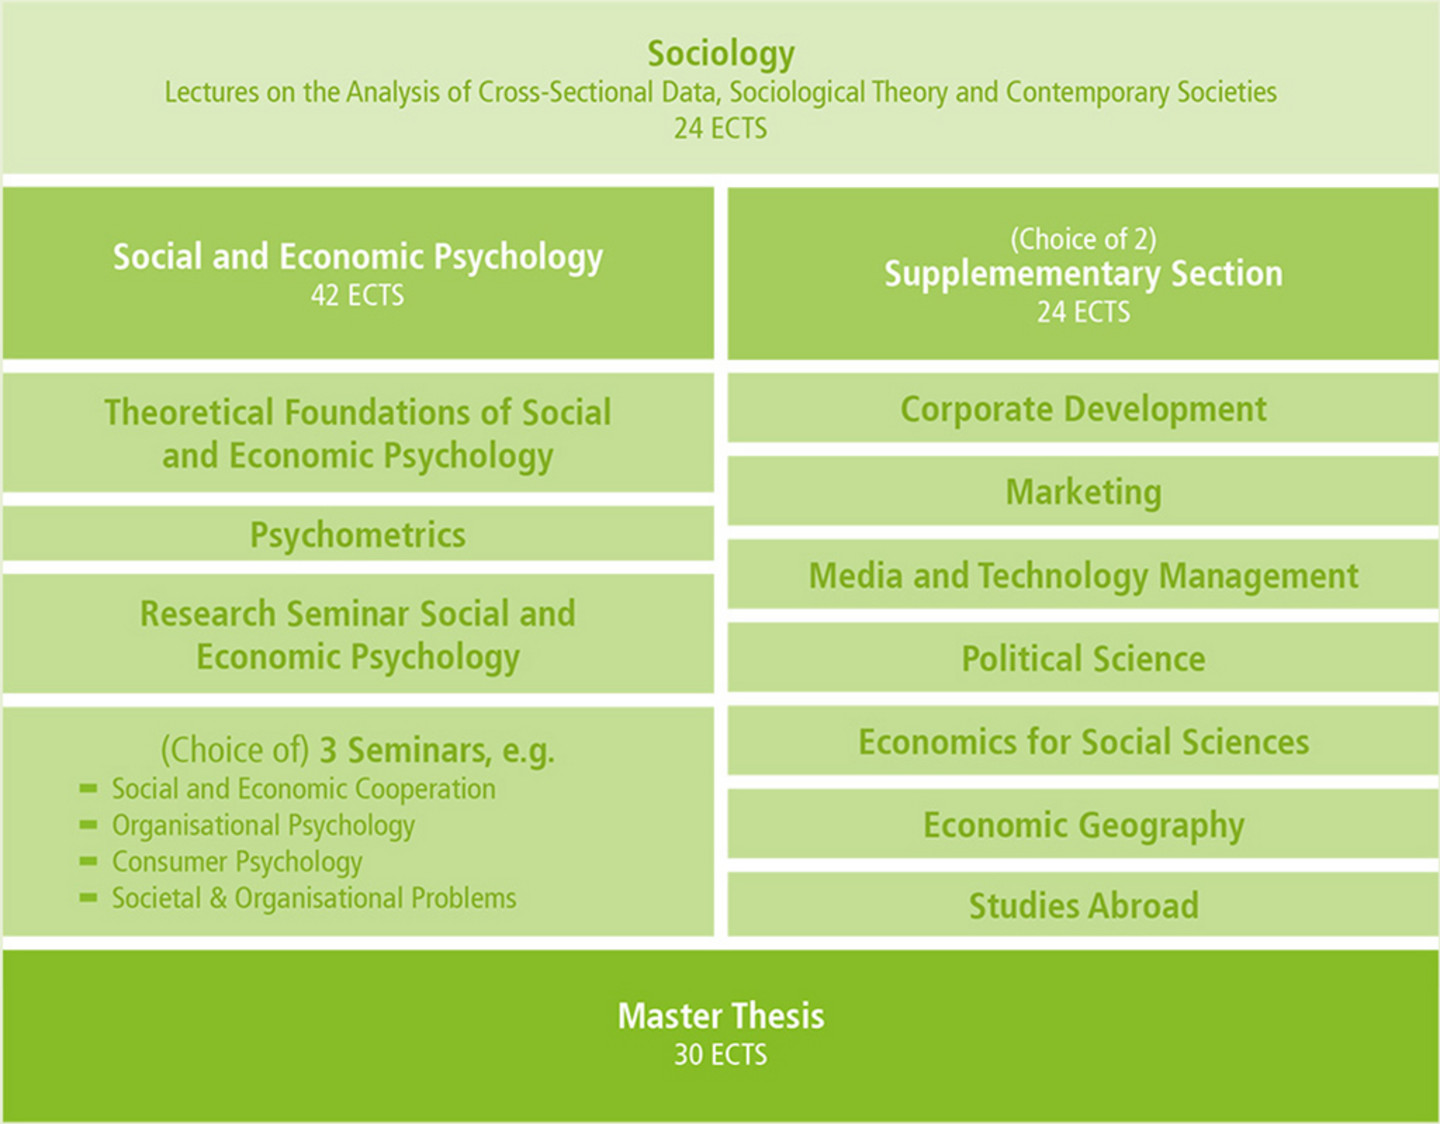 Tabular listing oft the Curriculum – 1st row: Core Section, Lectures on the Analysis of Cross-Sectional Data, Sociological Theory and Contemporary Societies, 24 ECTS – 2nd row, 1st column: Specialisation Section, 42 ECTS, Analysis of Longitudinal Data, Research Seminar in Sociology and Social Research, (Choice of) 3 Seminars, e.g. Social Change, Comparative Research, Diversity, Cohesion and Conflicts, Advanced Sociological Theories and Research – 2nd row, 2nd column: (Choice of 2), Supplementary Sections, 24 ECTS, Marketing, Media and Technology Management,  Data Analytics, Corporate Development, Economics for Social Sciences, Economic Geography, Political Science, Optional Semester Abroad – 3rd row: Master Thesis, 30 ECTS